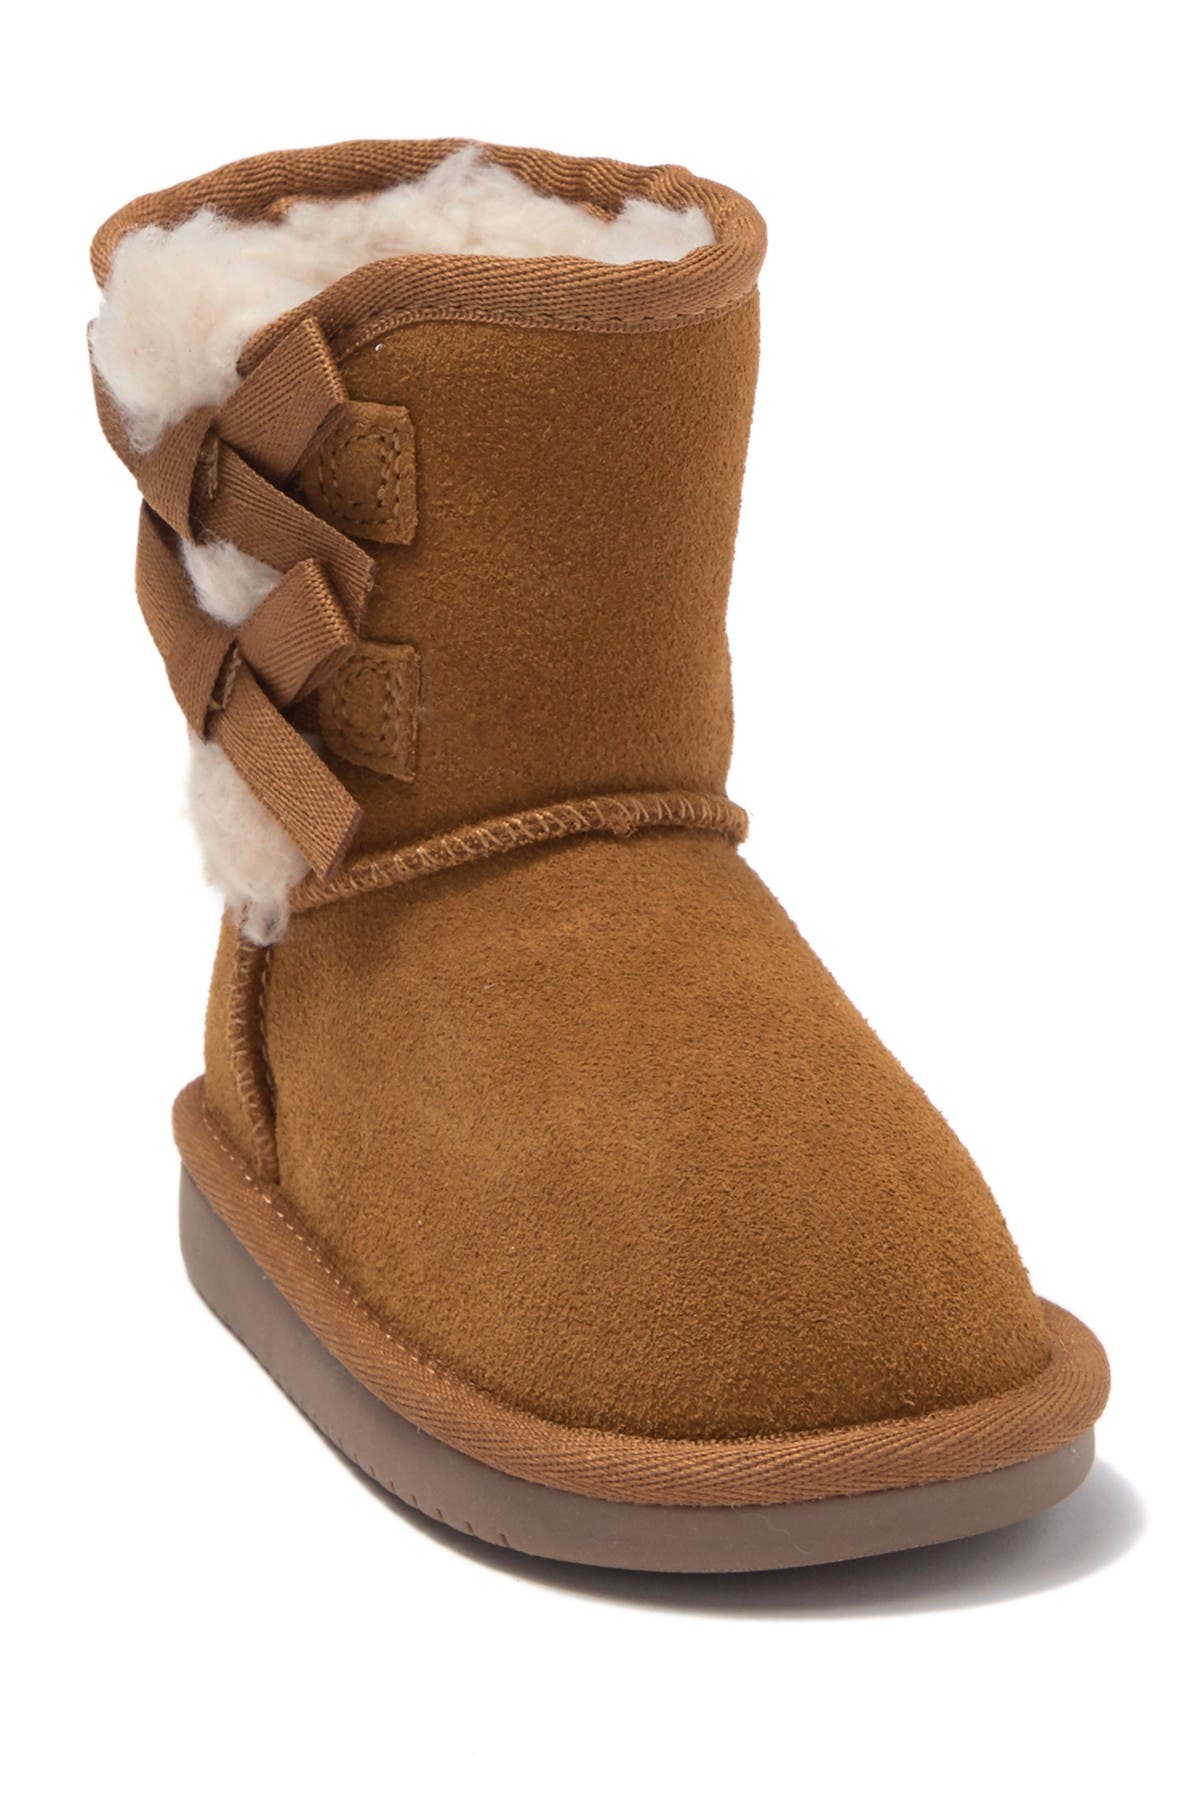 fake ugg boots with bows